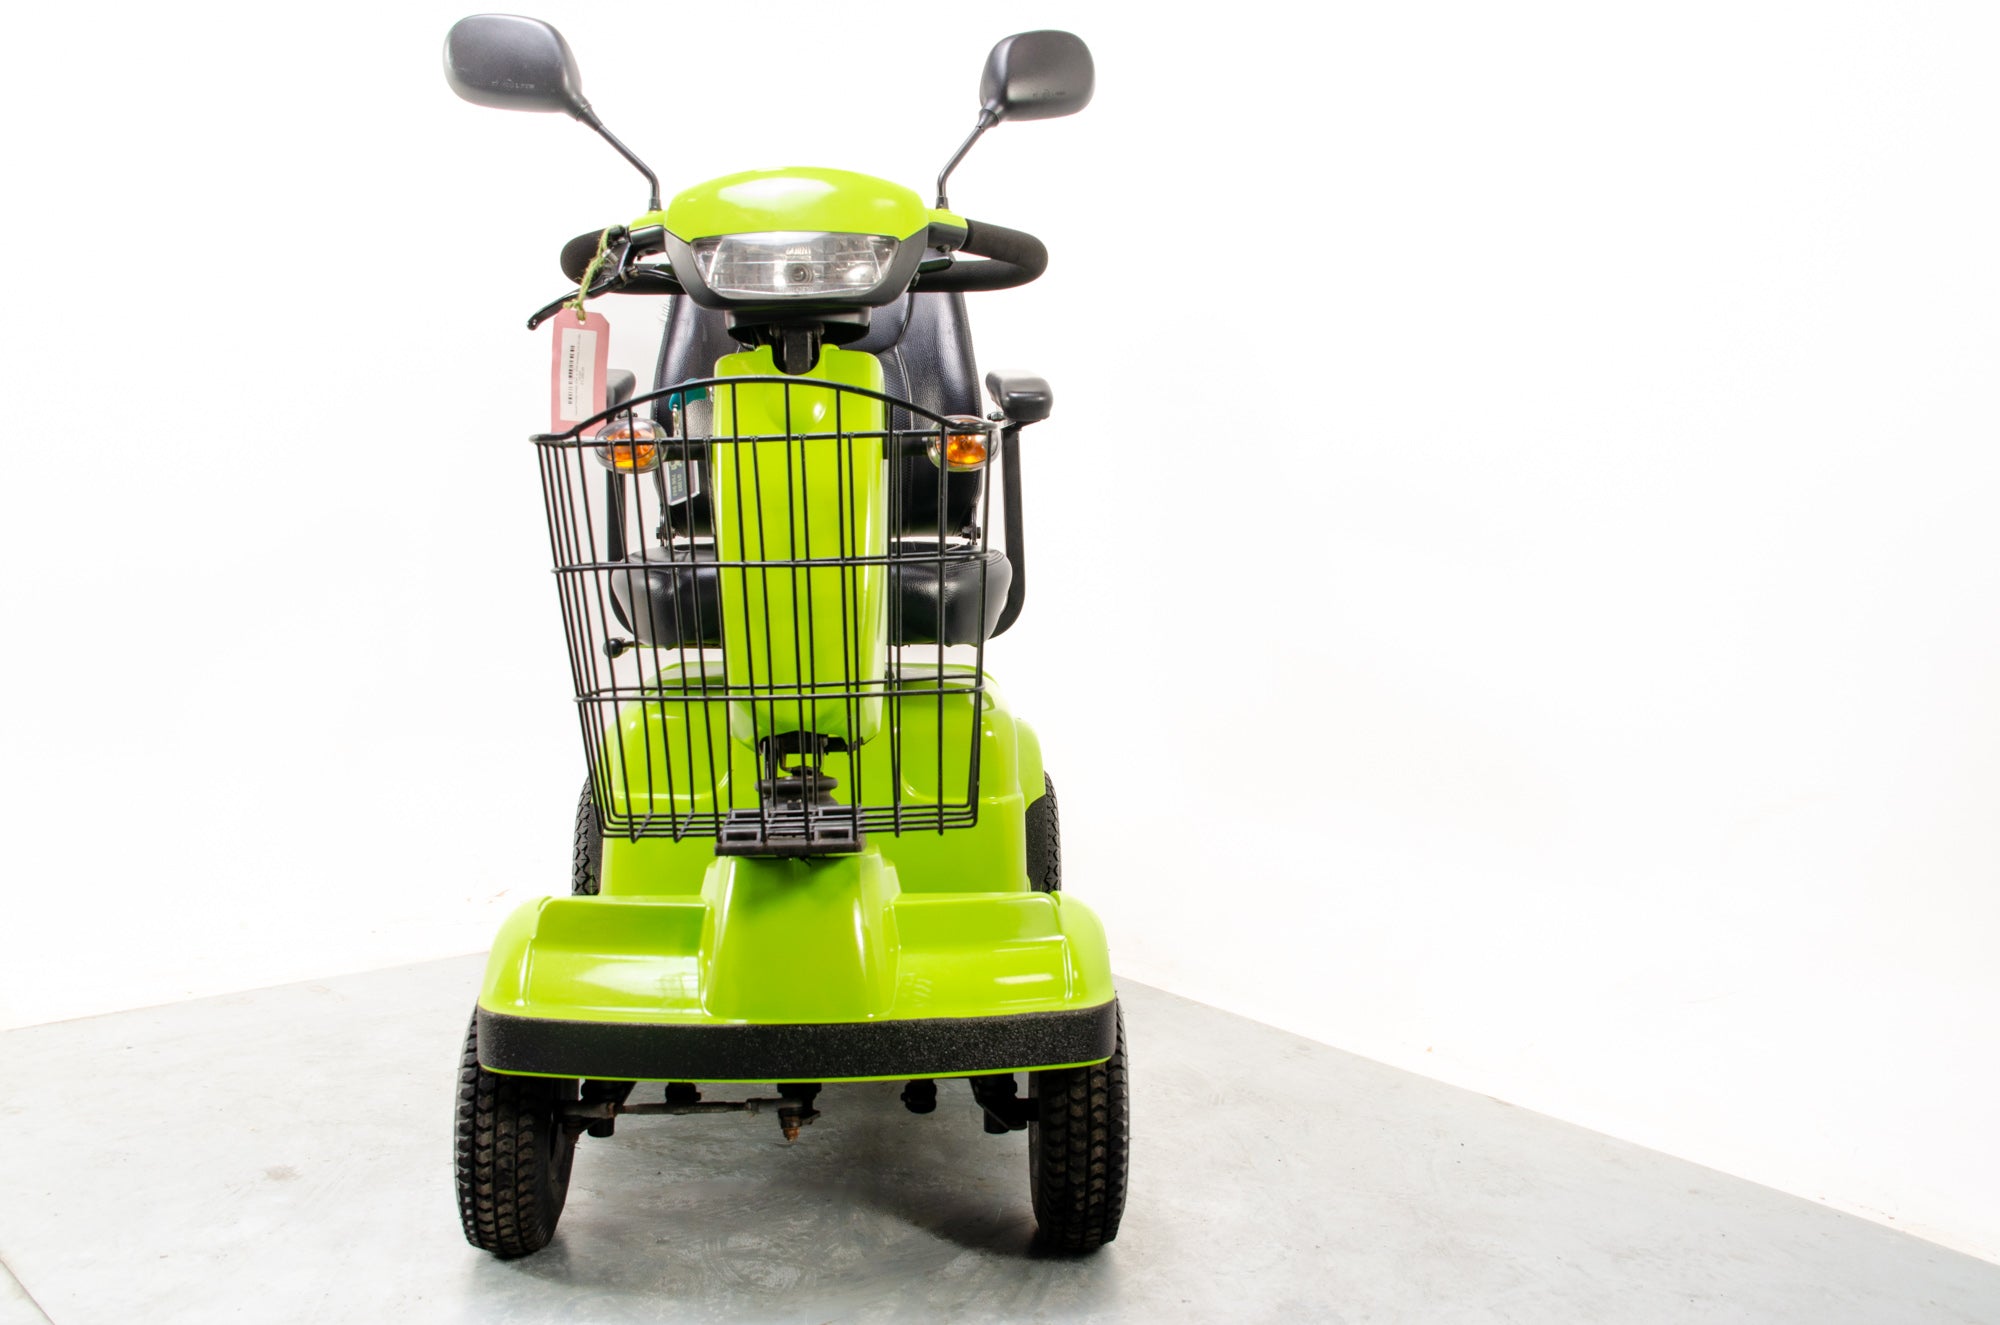 Rascal Frontier All-Terrain Off-Road Used Electric Mobility Scooter 8mph Suspension Midsize Green